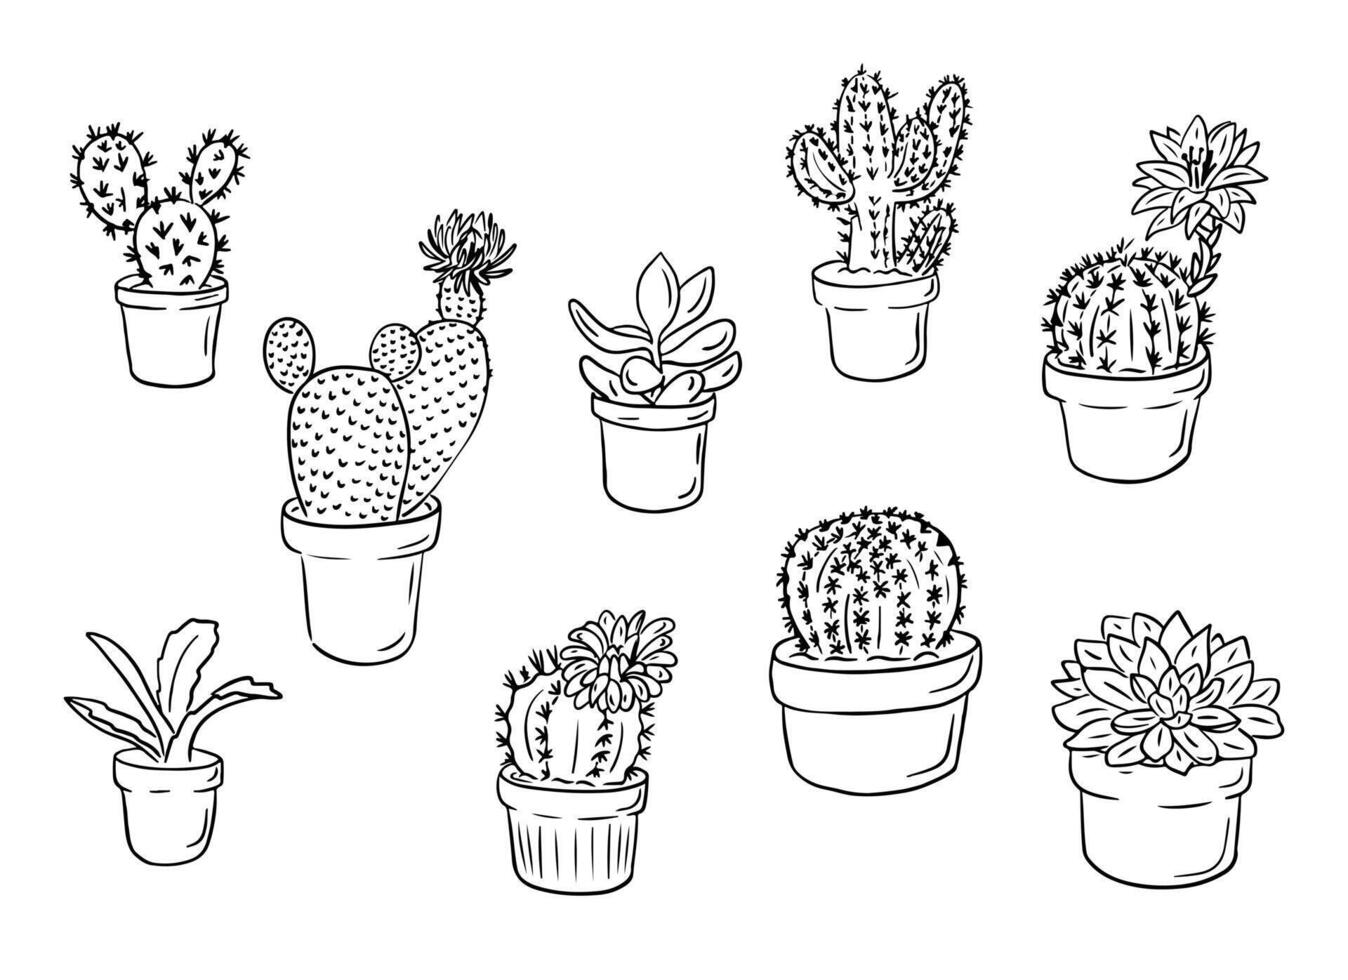 Black hand drawn sketchy drawings of cactuses in pots. Vector contour drawings isolated on white background. Ideal for coloring pages, tattoo, pattern